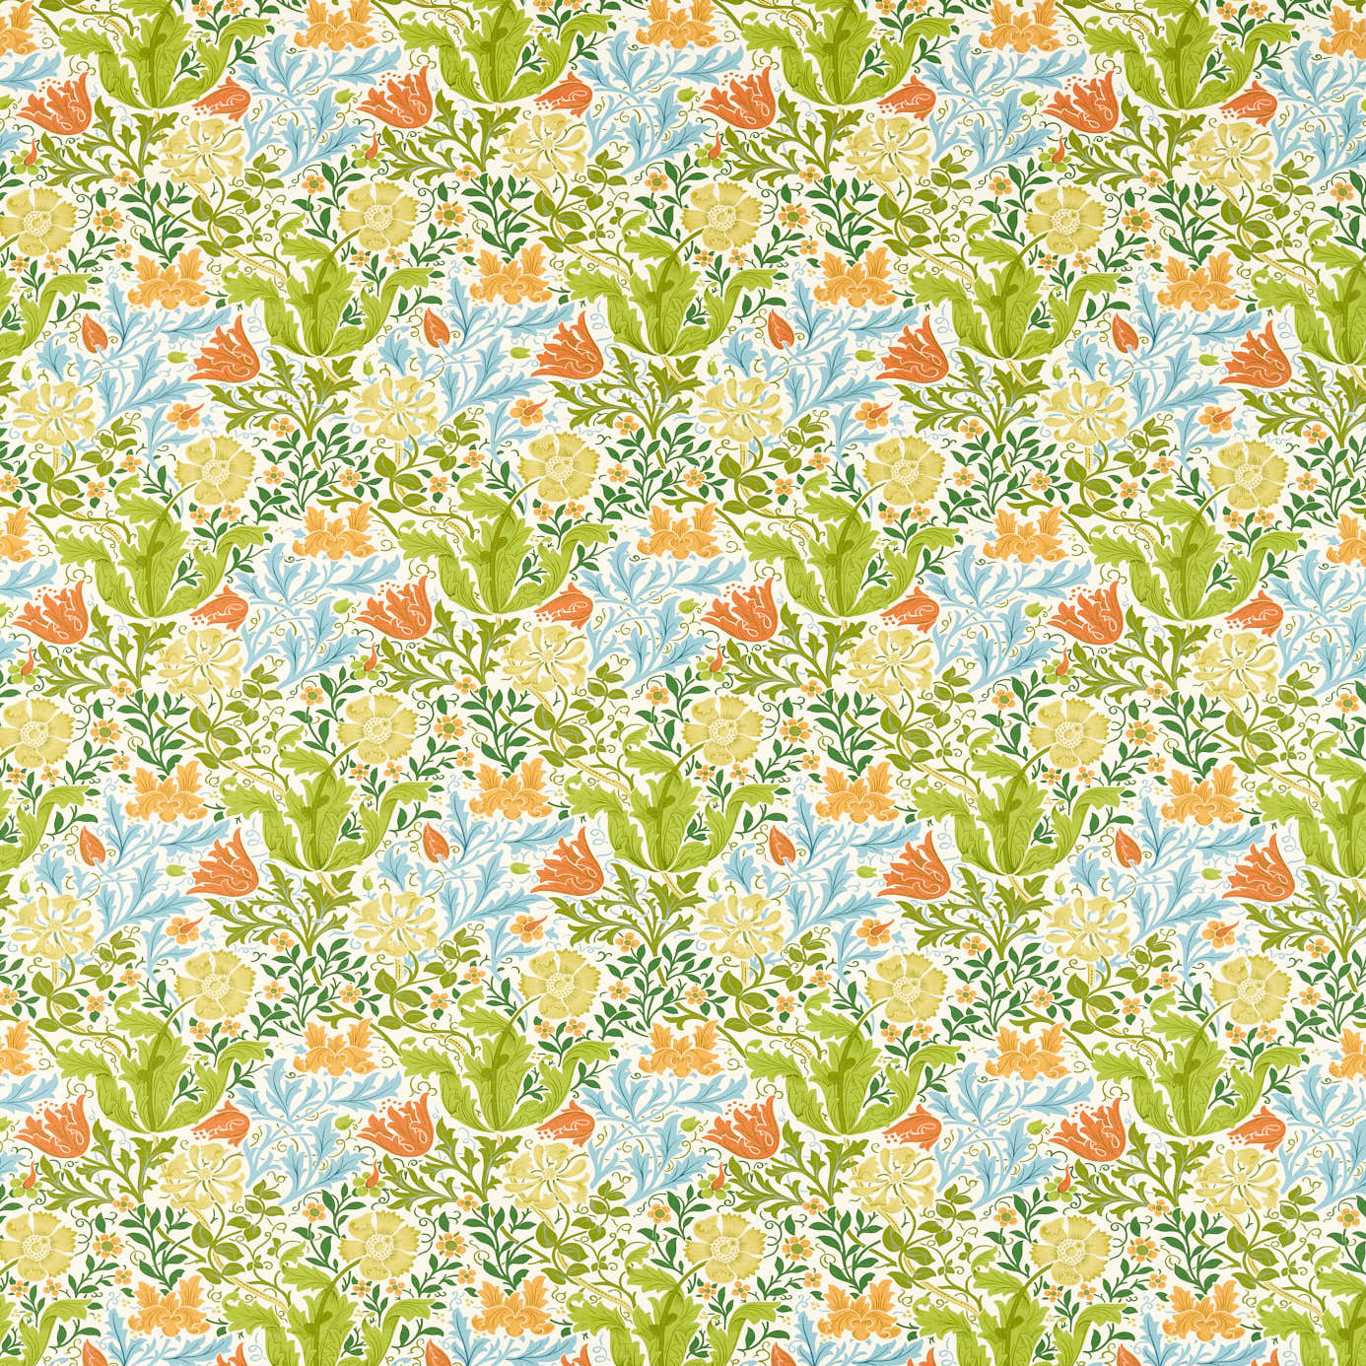 Compton Fabric by Morris & Co. - MCOP226988 - Spring